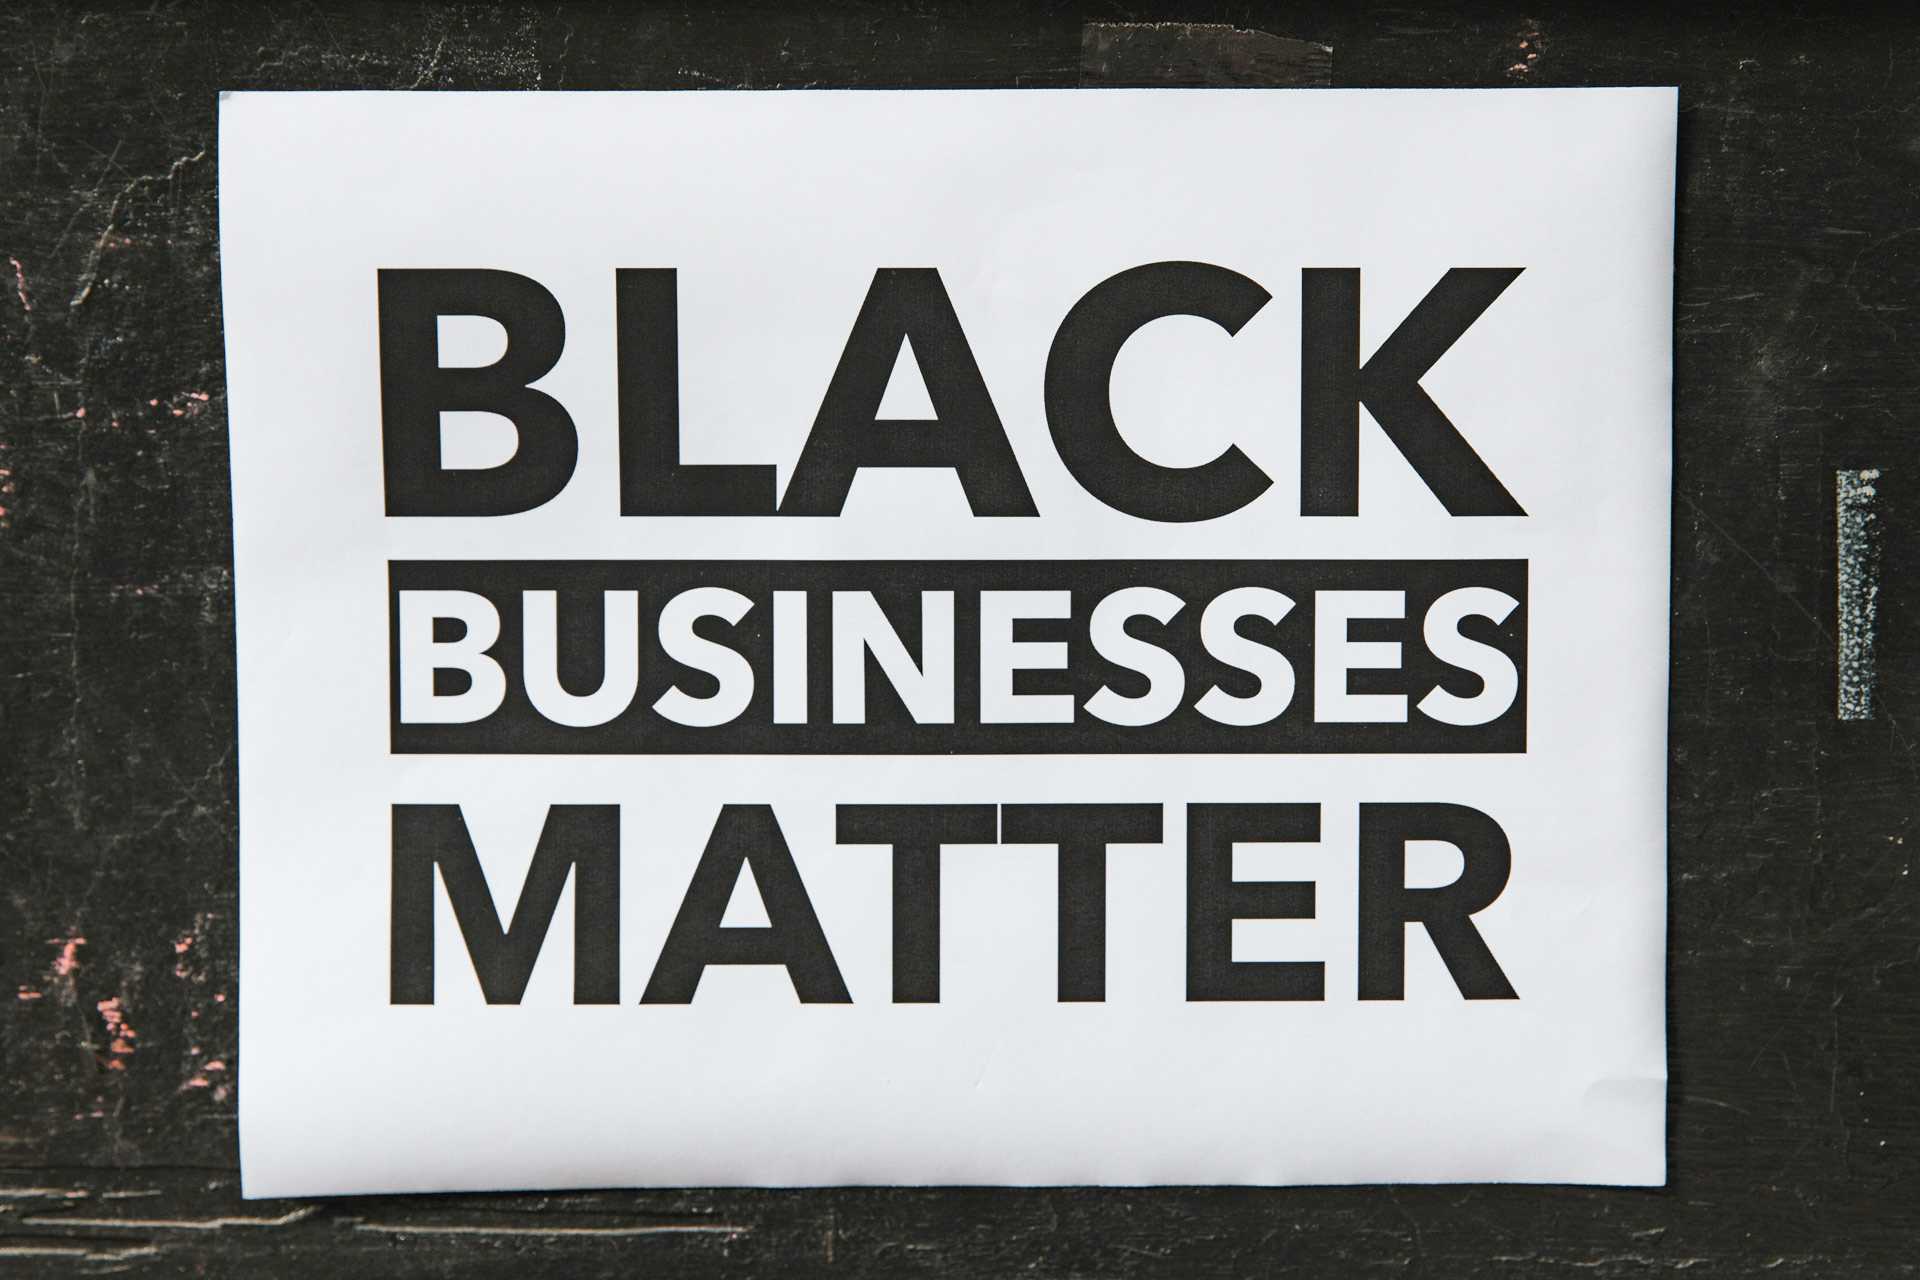 sign on black wall says “Black Businesses Matter”